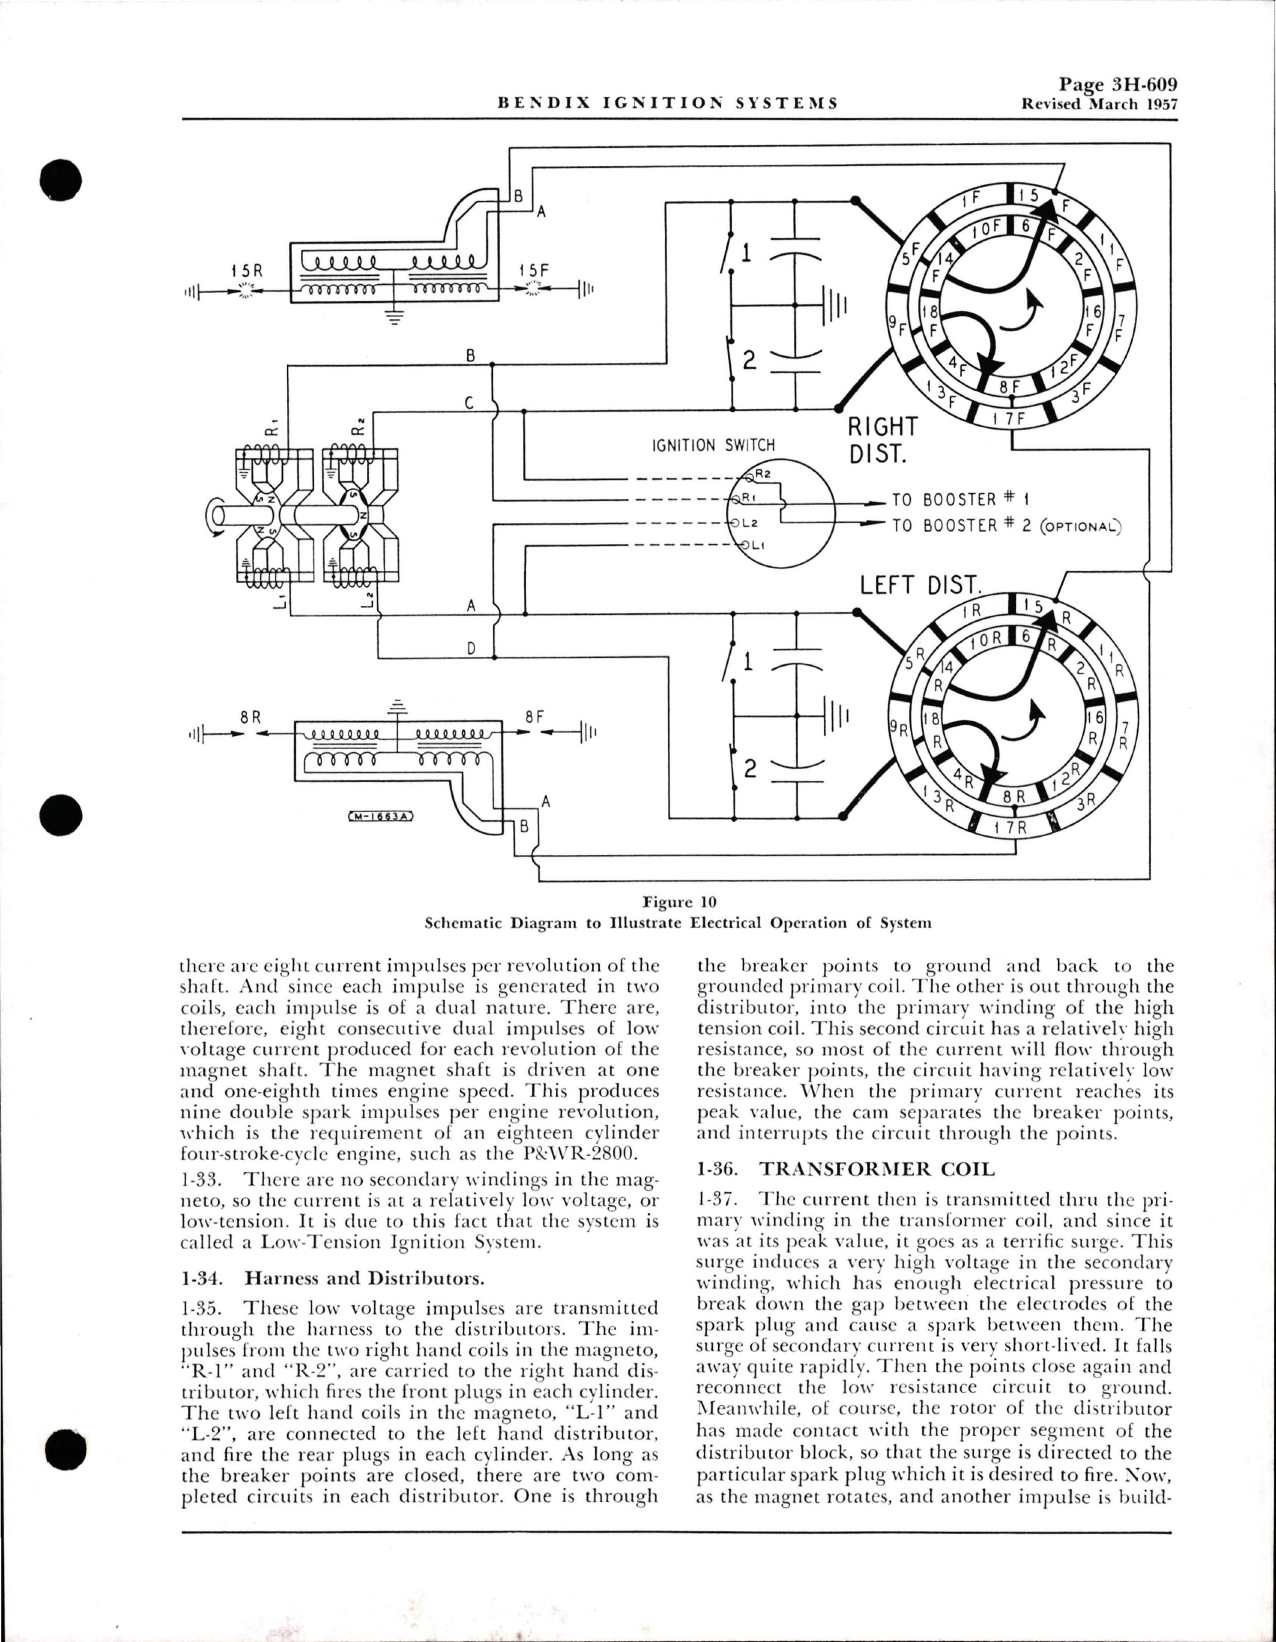 Sample page 9 from AirCorps Library document: Overhaul Instructions for Low Tension - High Altitude Ignition System